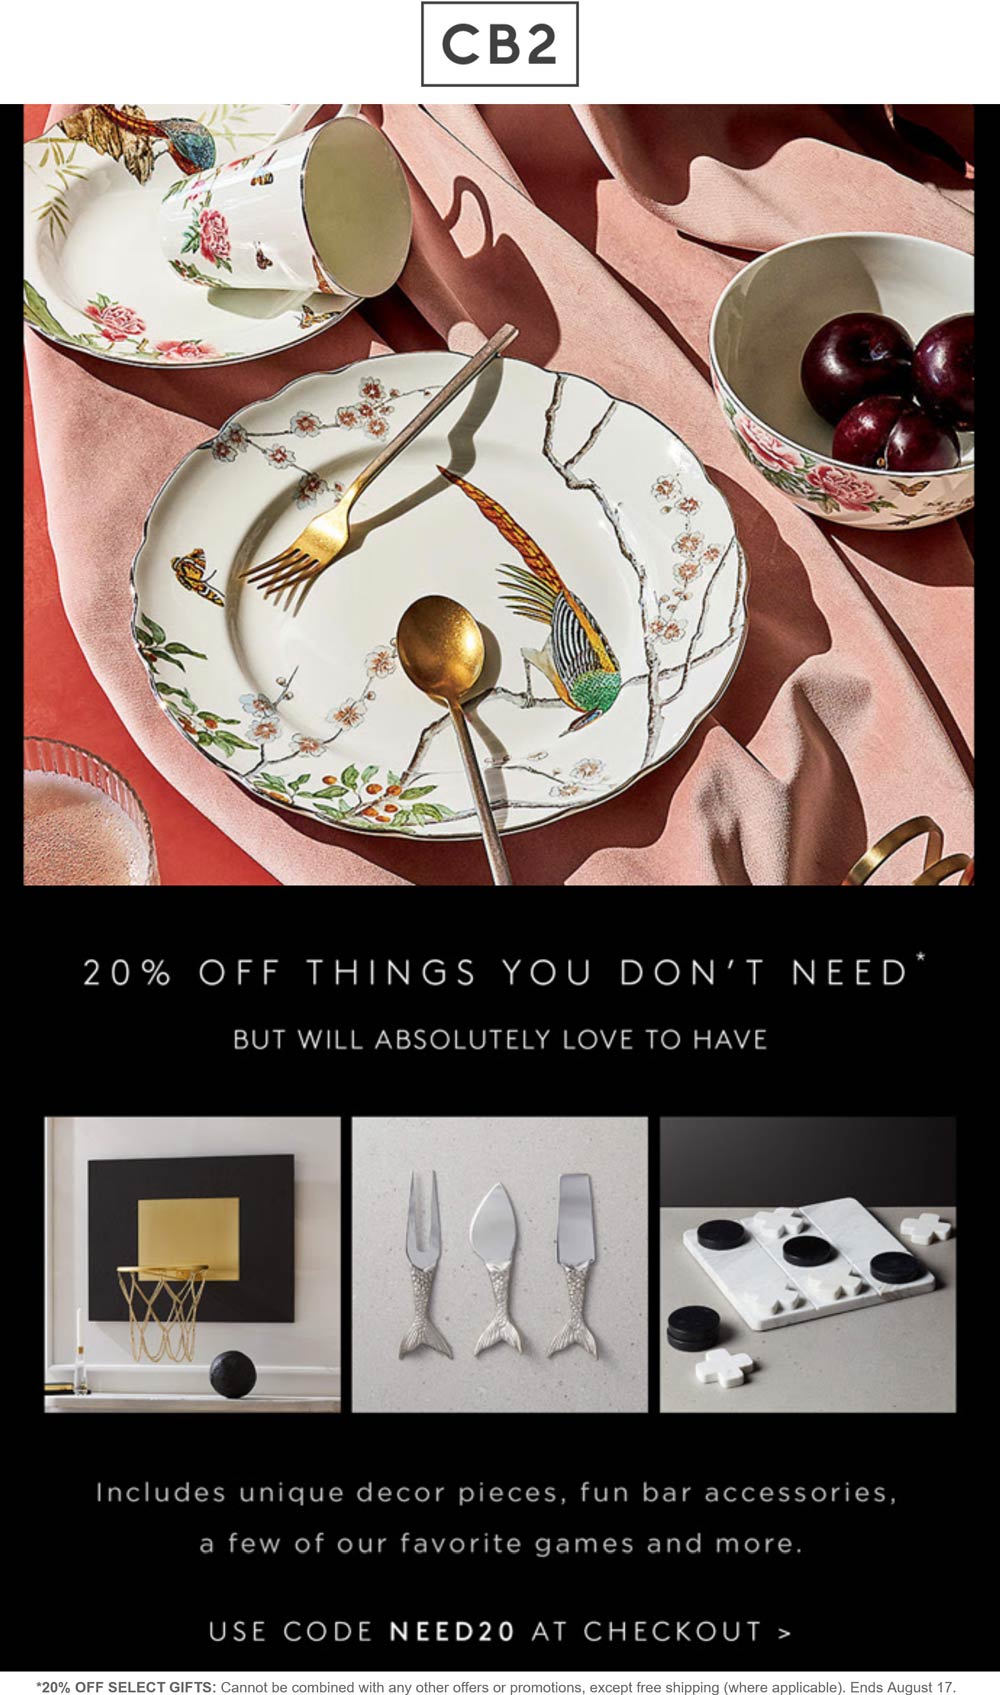 CB2 stores Coupon  20% off today at Crate & Barrel CB2 via promo code NEED20 #cb2 